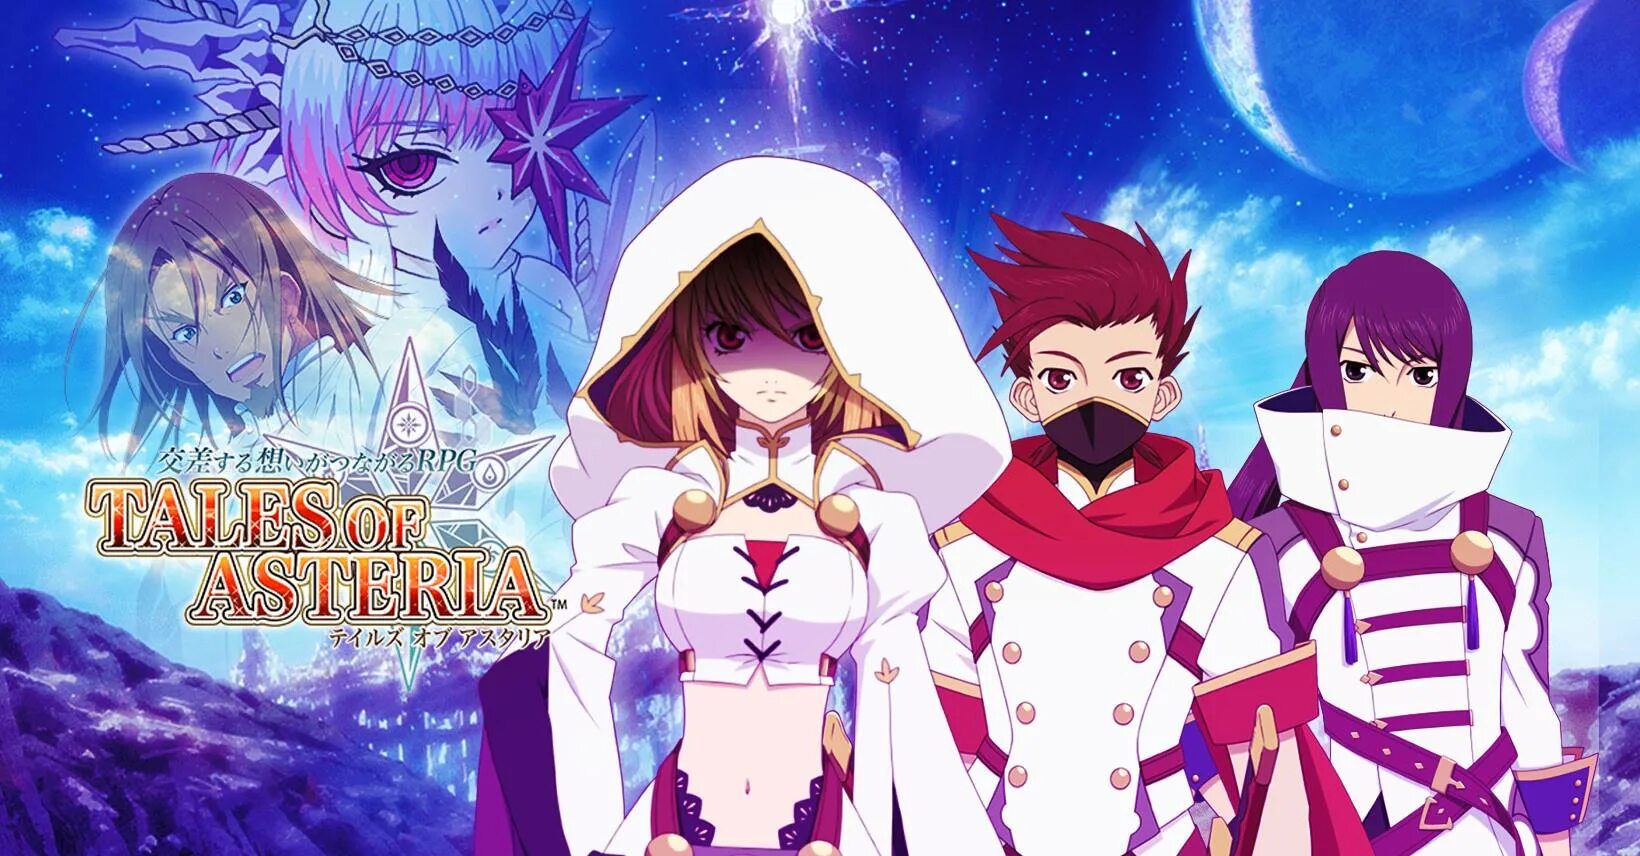 Second chances asteria. Tales of Asteria Android. Tales of Asteria zelos. Tirug Tales of Asteria.